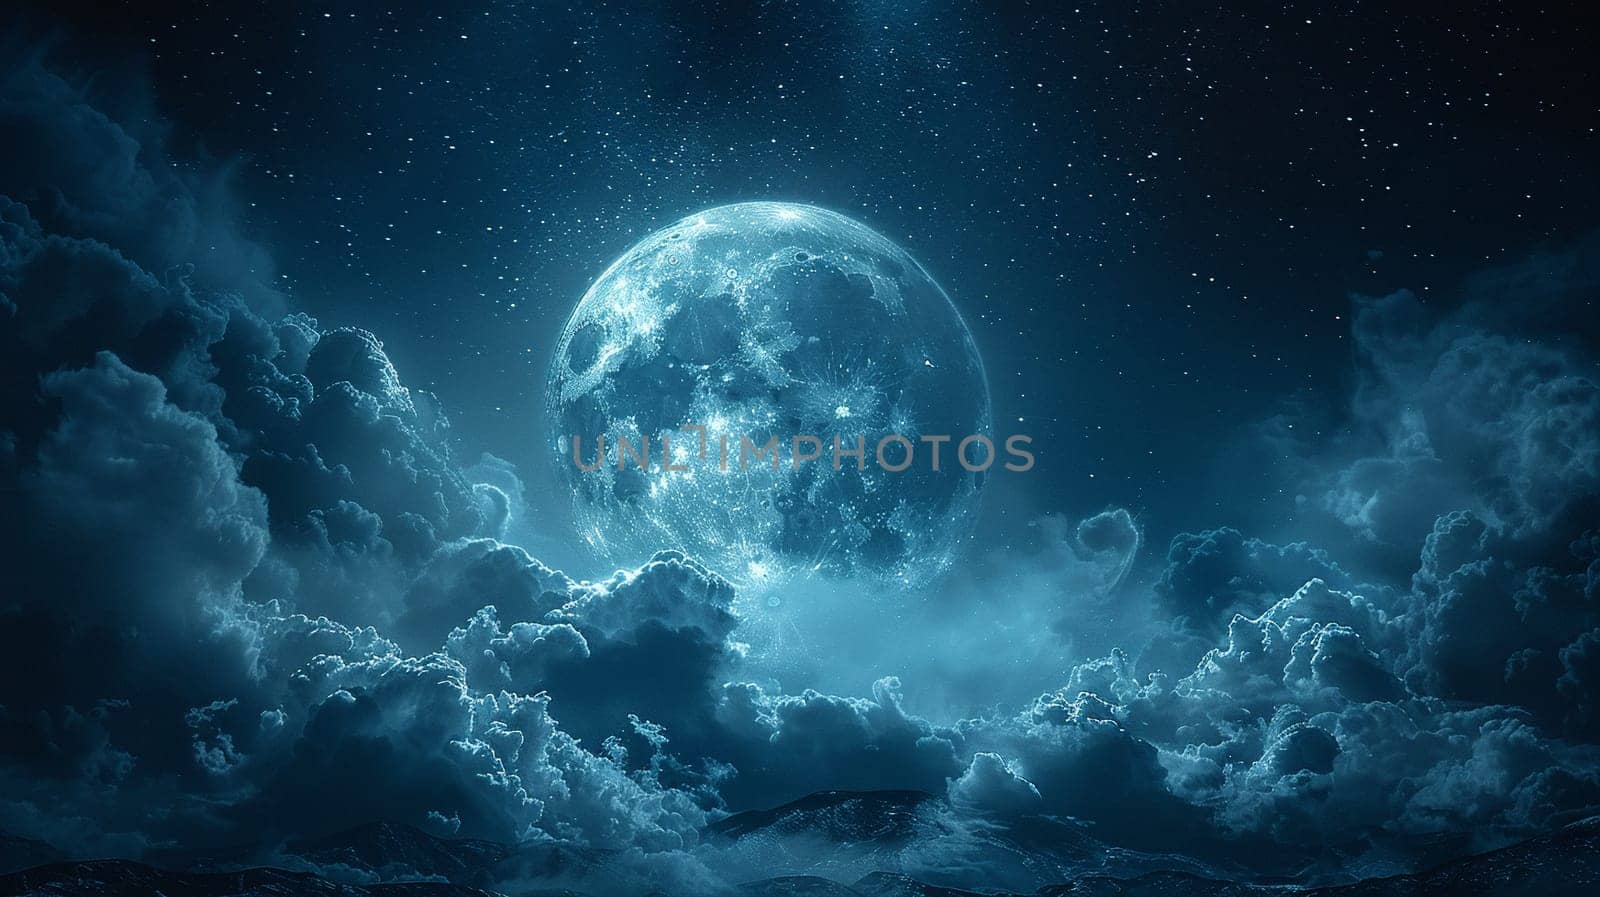 Moonlit clouds in a night sky, suitable for mysterious and dreamy designs.